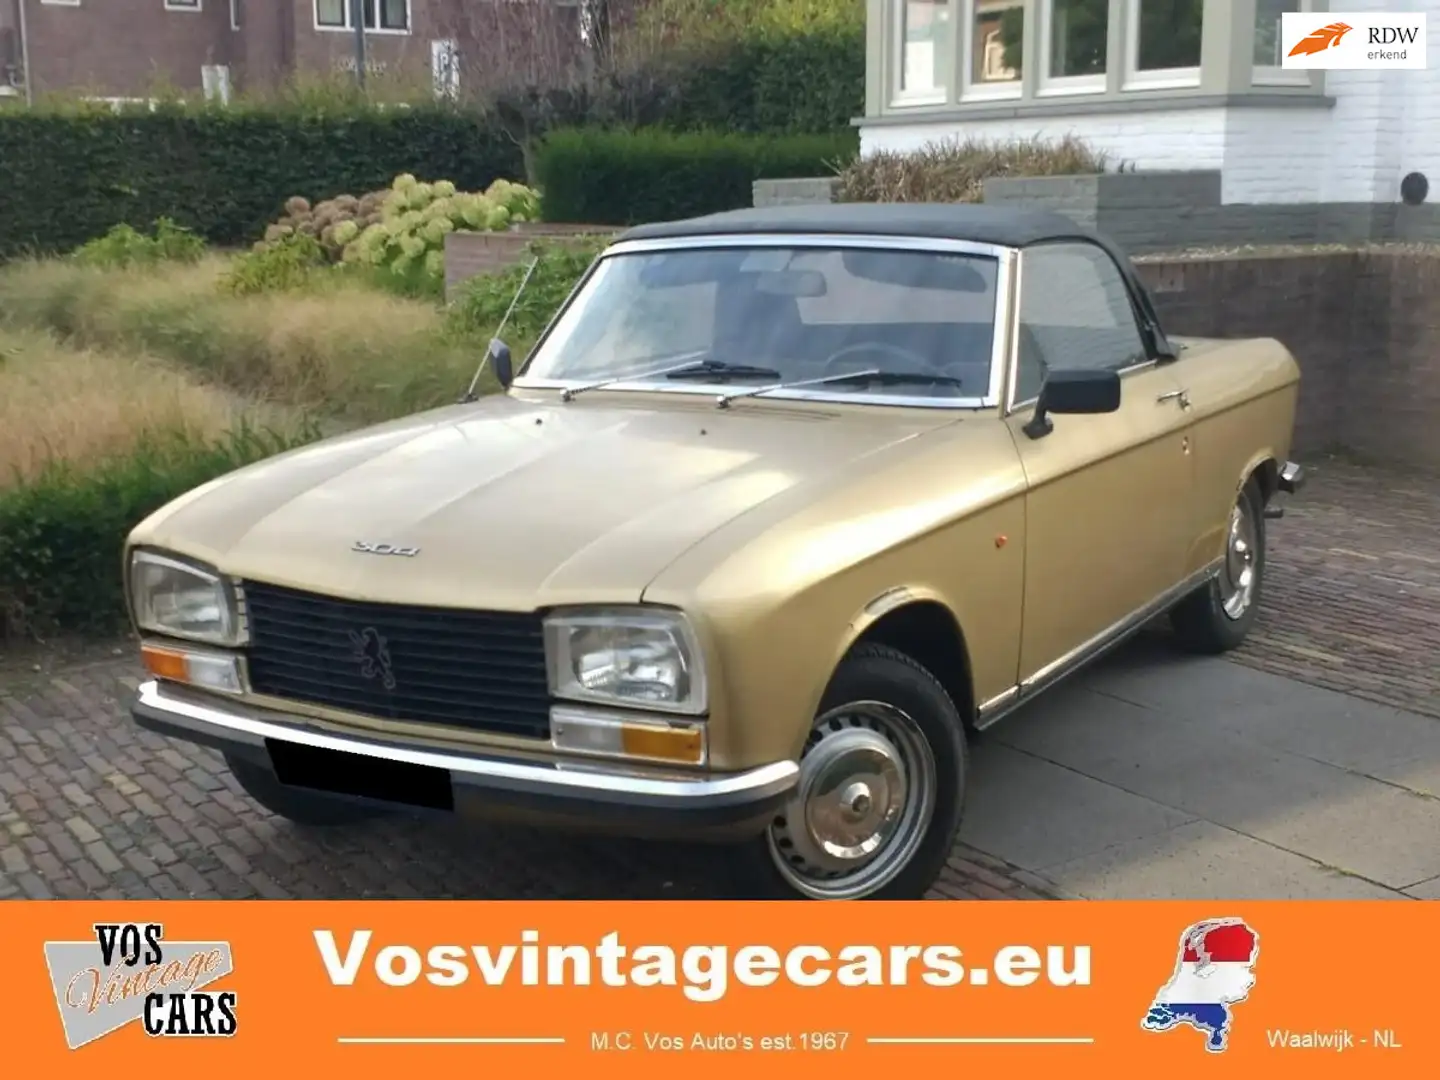 Peugeot 304 S Cabriolet - Project Arany - 1